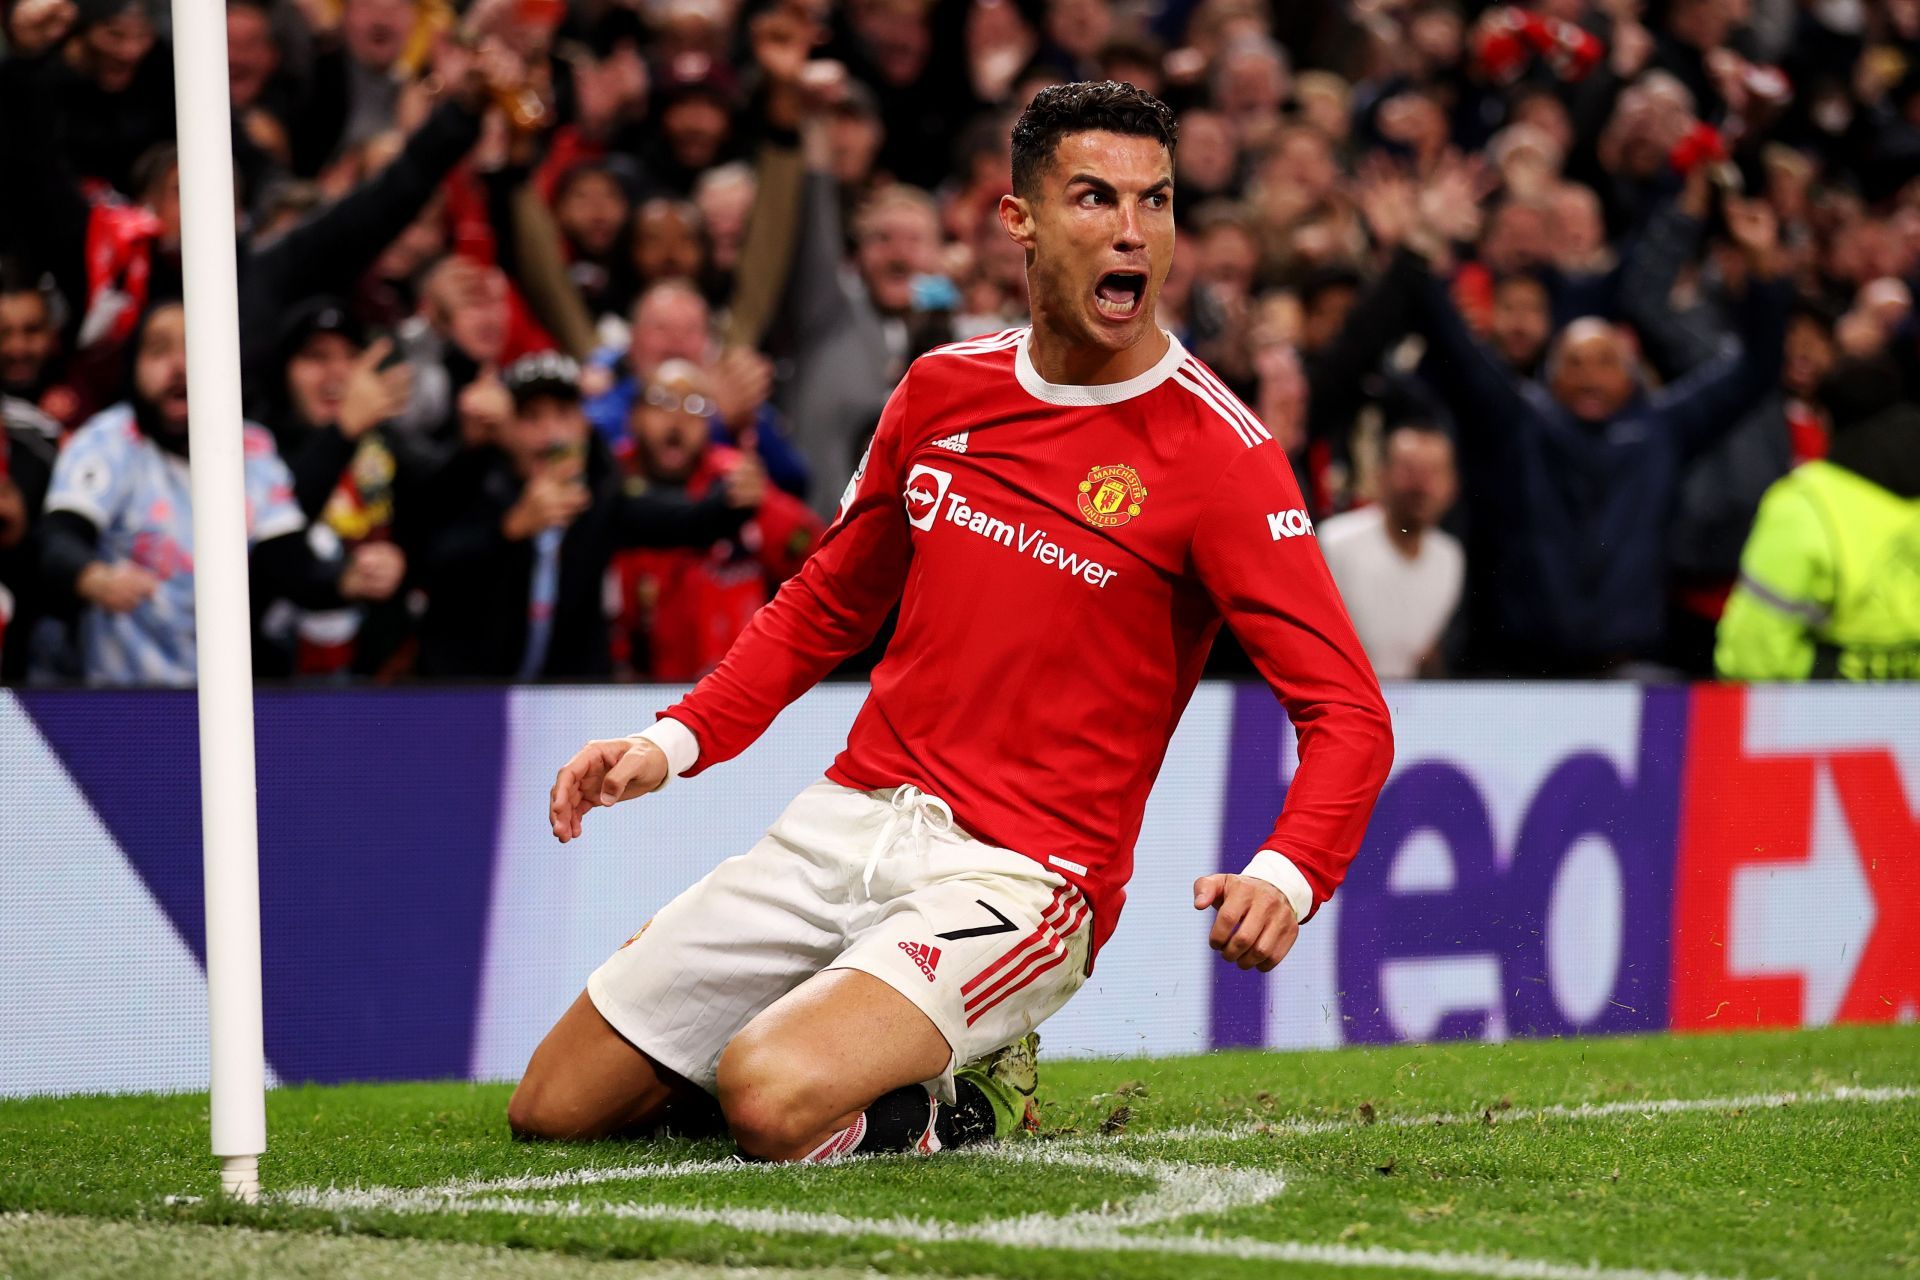 Cristiano Ronaldo scored a dramatic winner for Manchester United at Old Trafford.